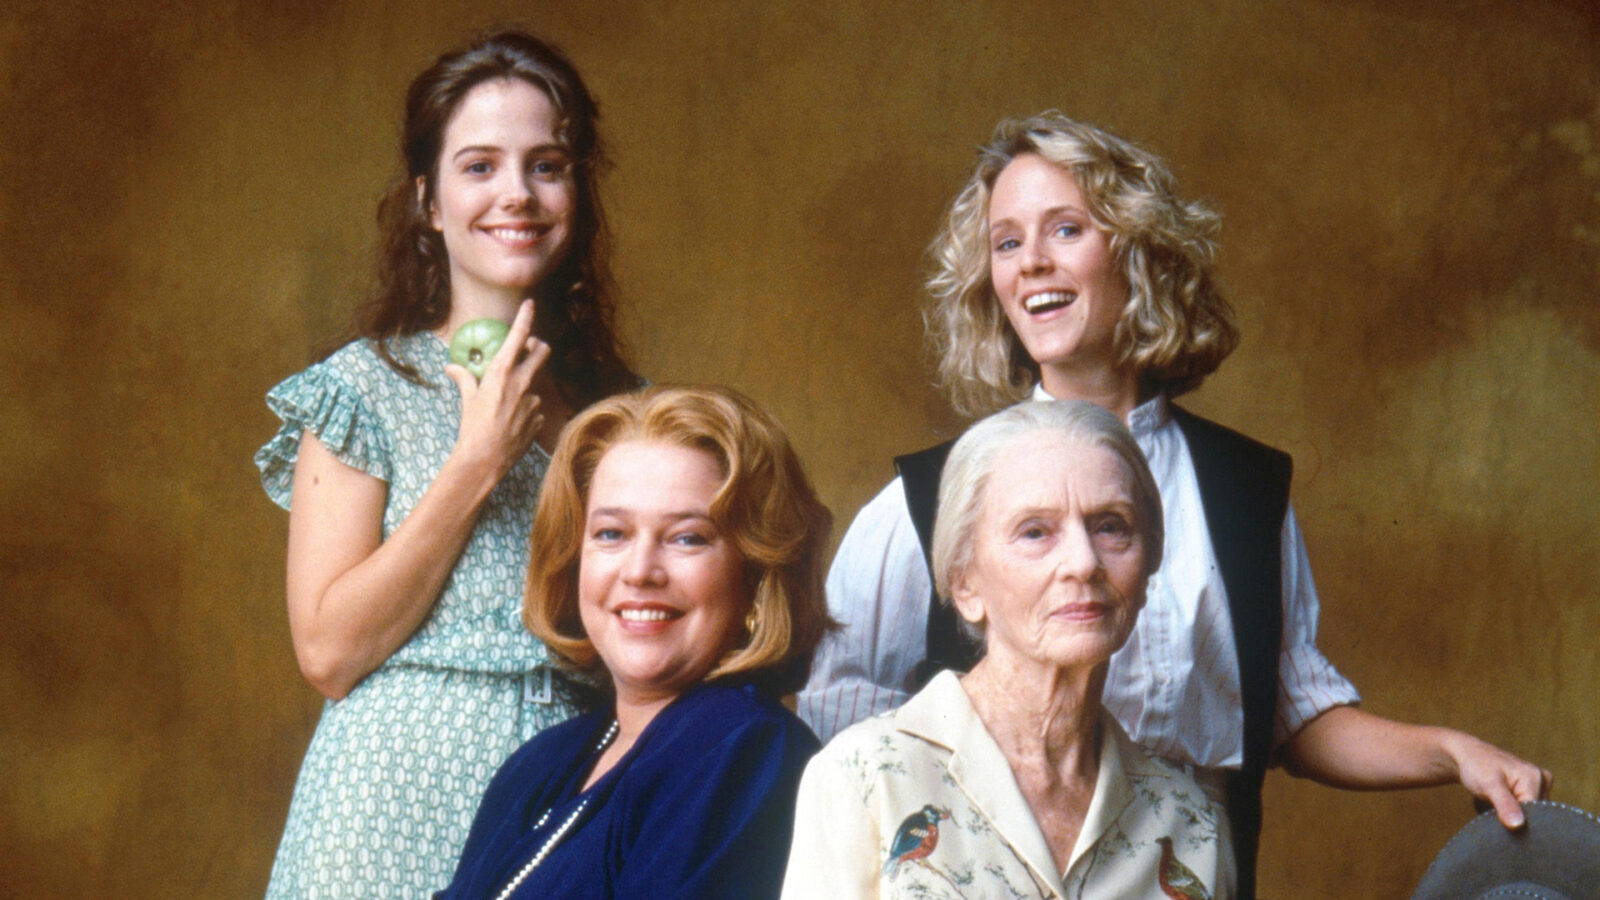 Name That Movie! Can You Fill in Blank & Name Movies Wi… Quiz Fried Green Tomatoes